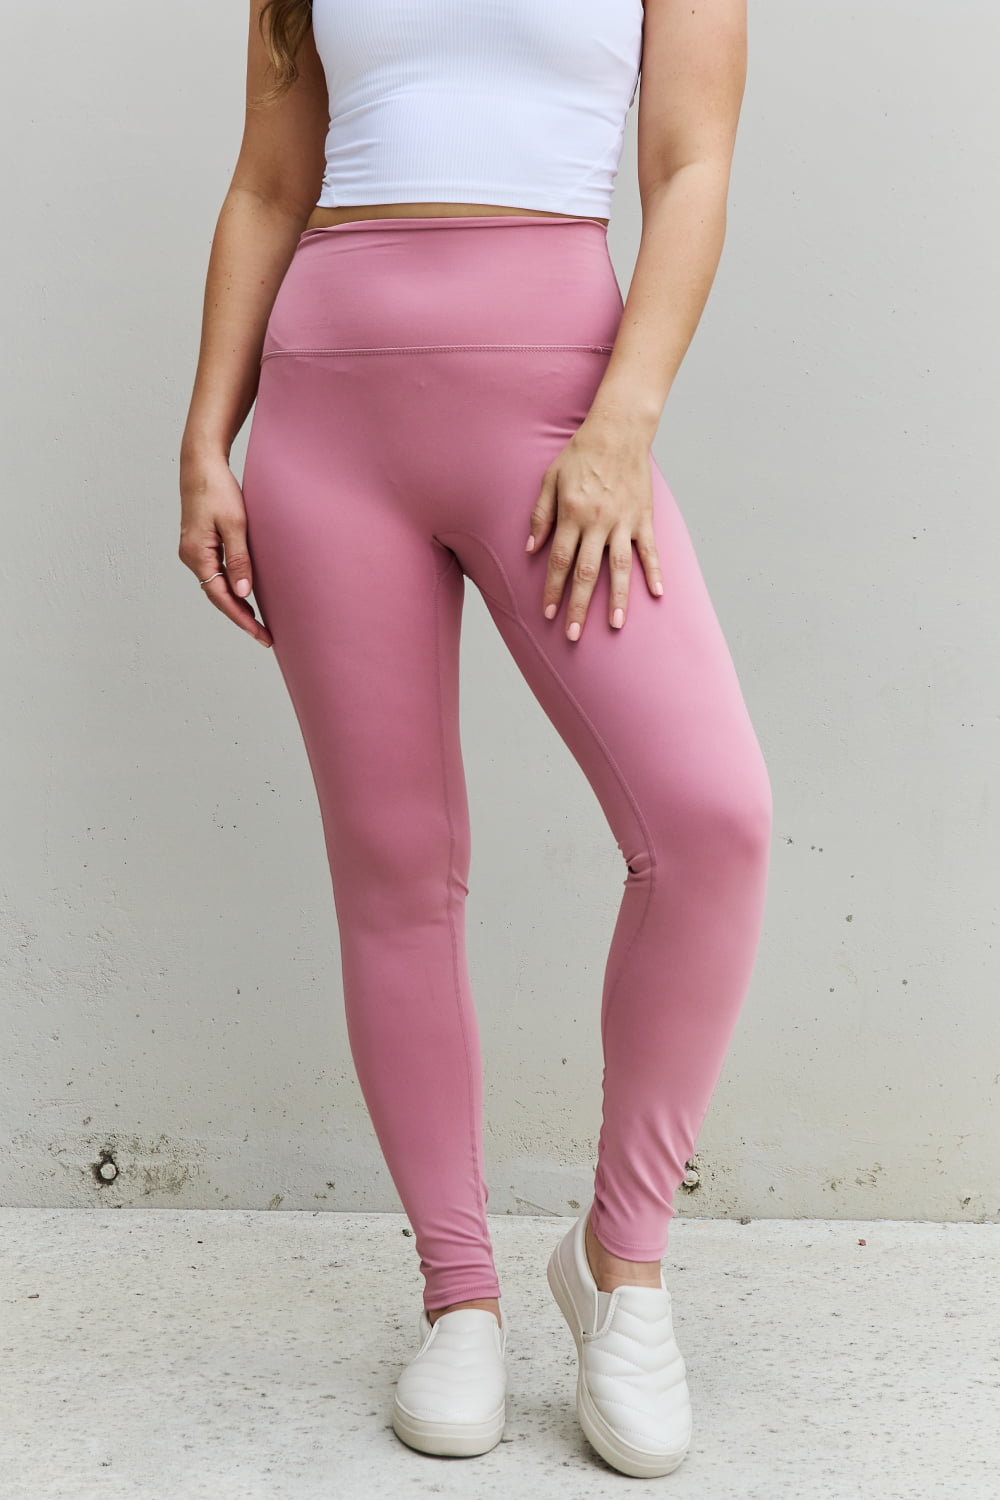 Fit For You Full Size High Waist Active Leggings in Light Rose